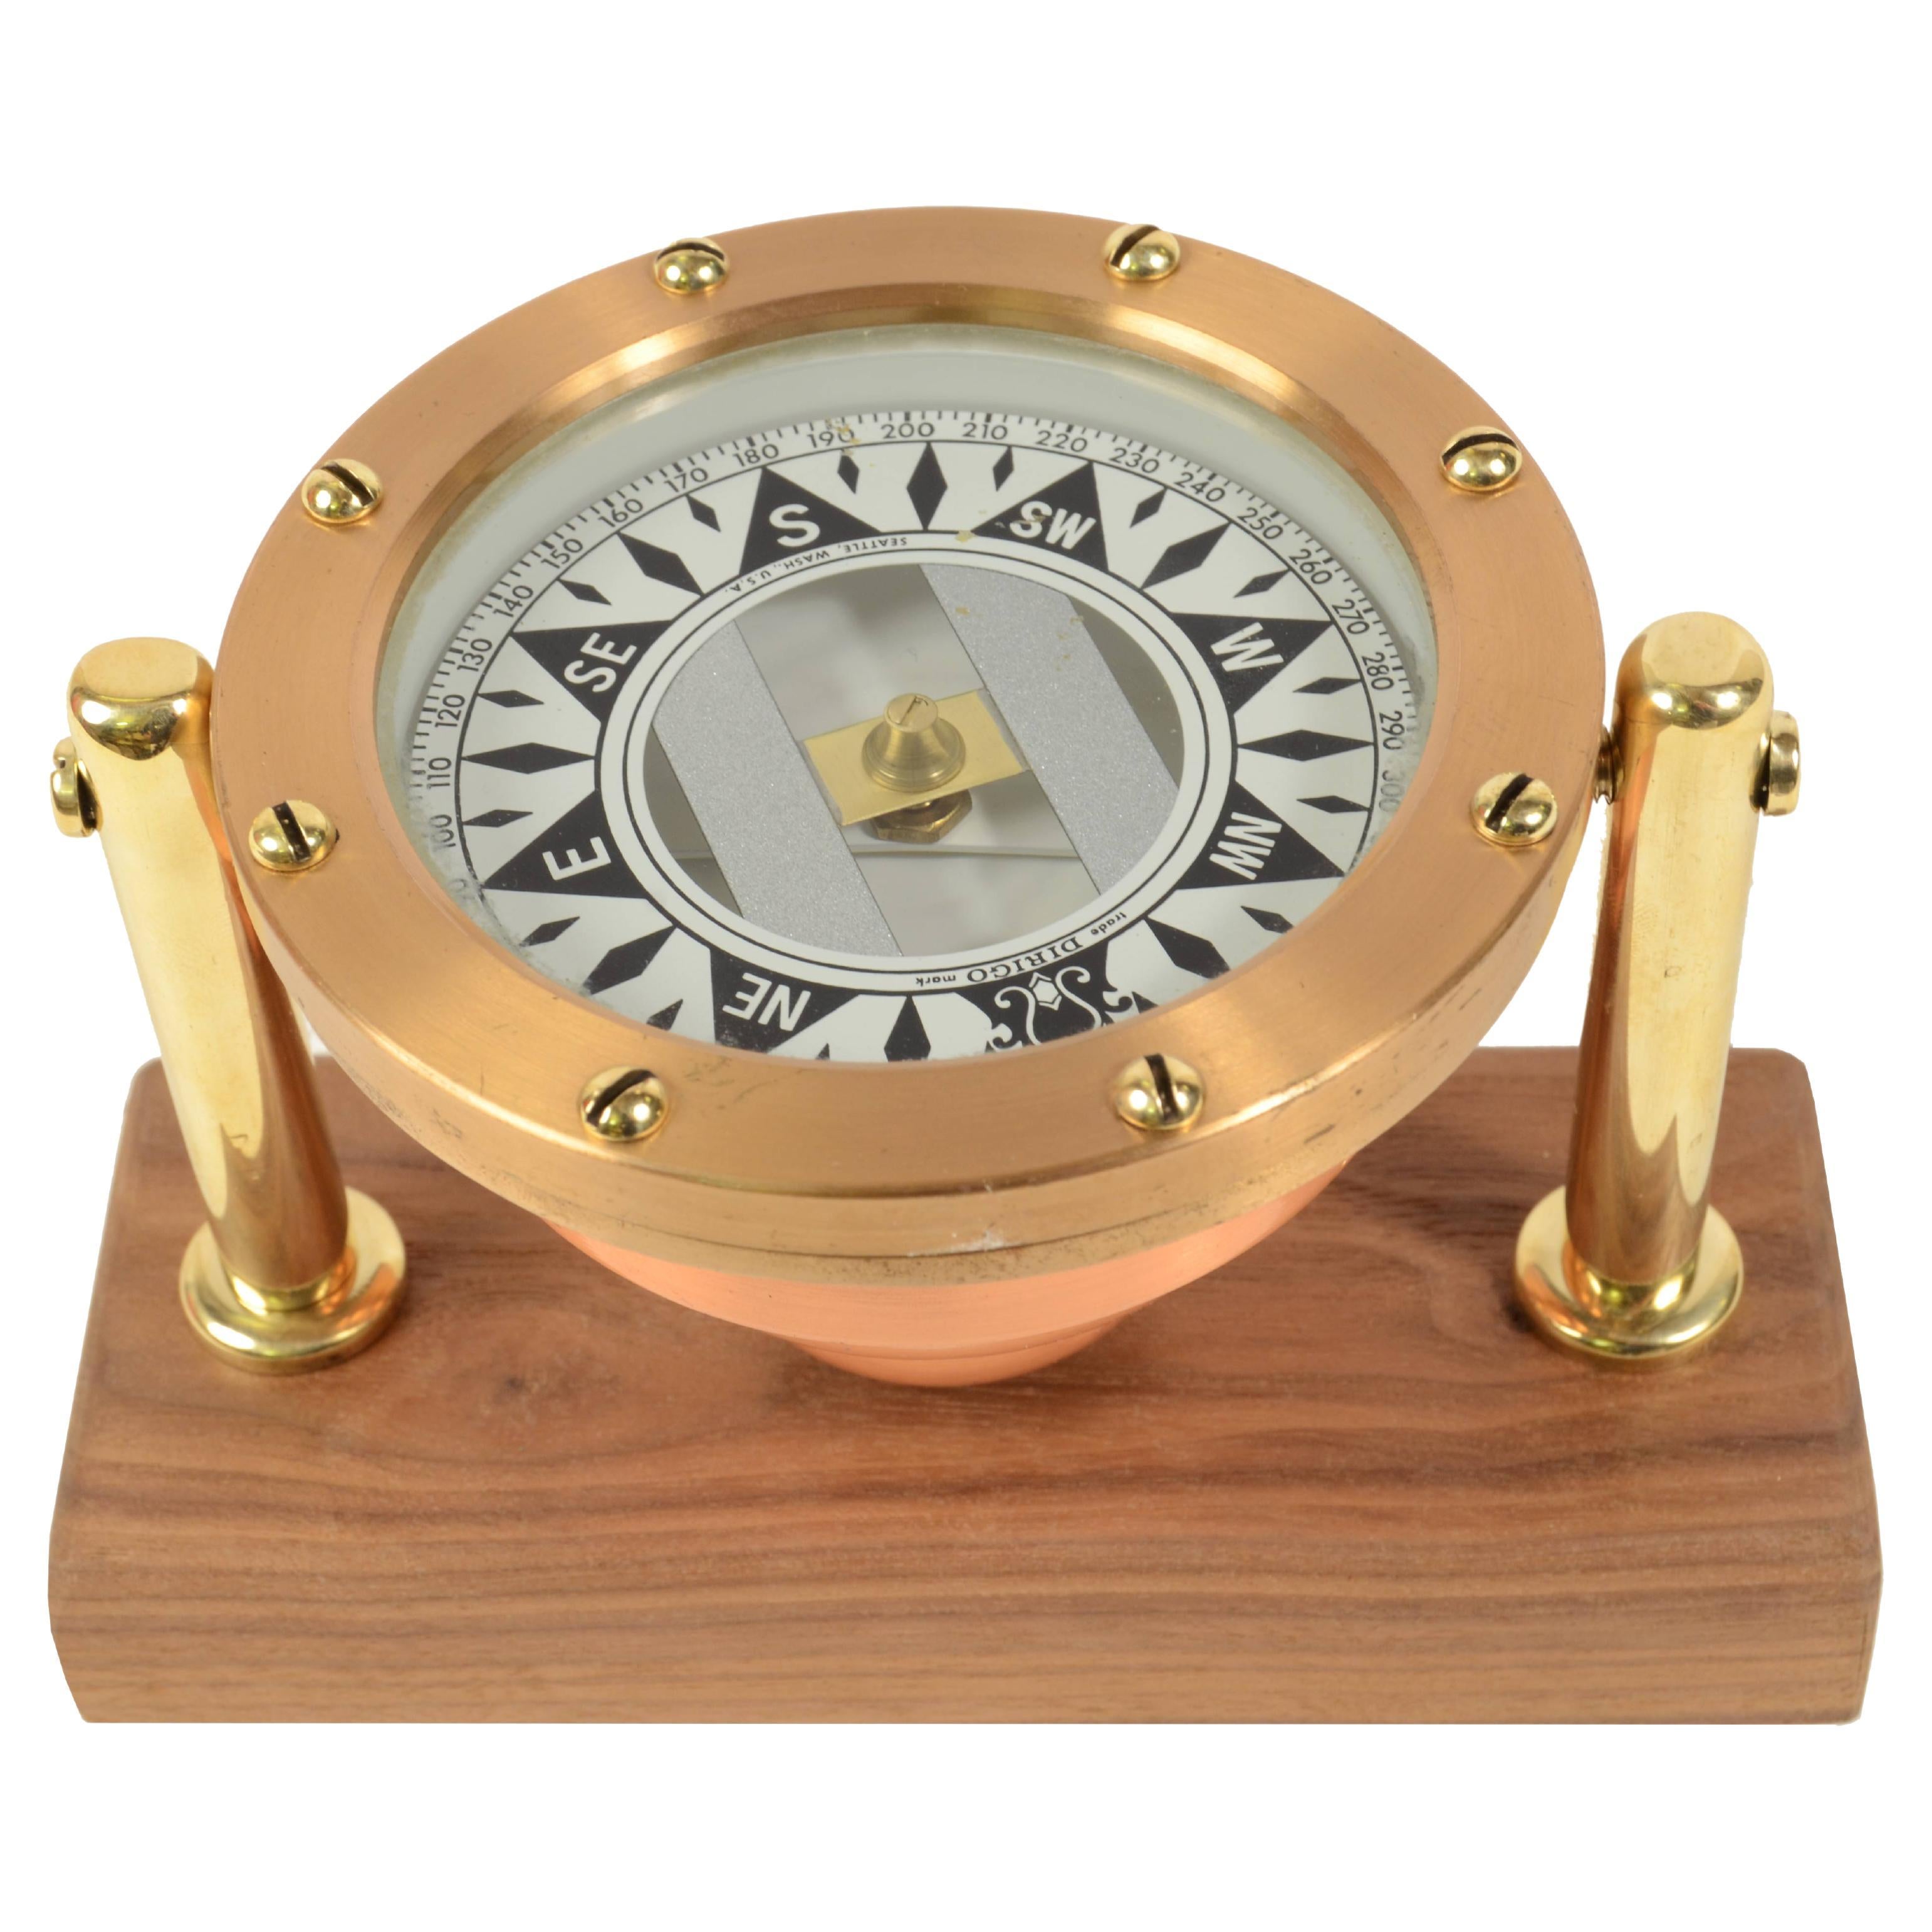 Details about   VINTAGE MARITIME COMPASS/TELESCOPE/SEXTANT W/WOODEN BOX NAUTICAL BRASS GIFT SET 